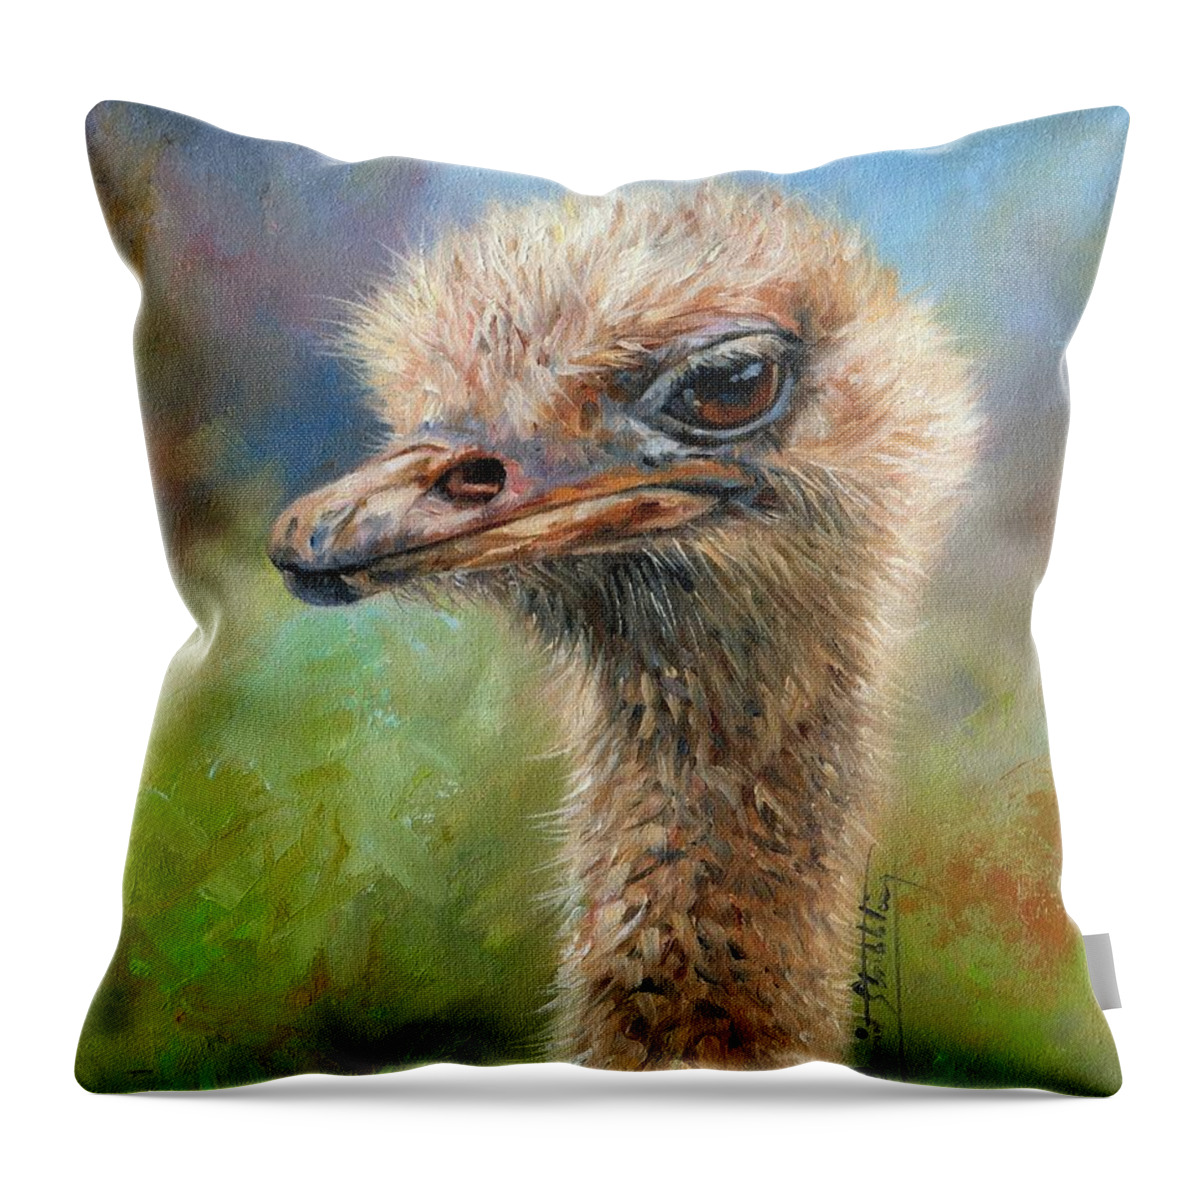 Ostrich Throw Pillow featuring the painting Ostrich by David Stribbling